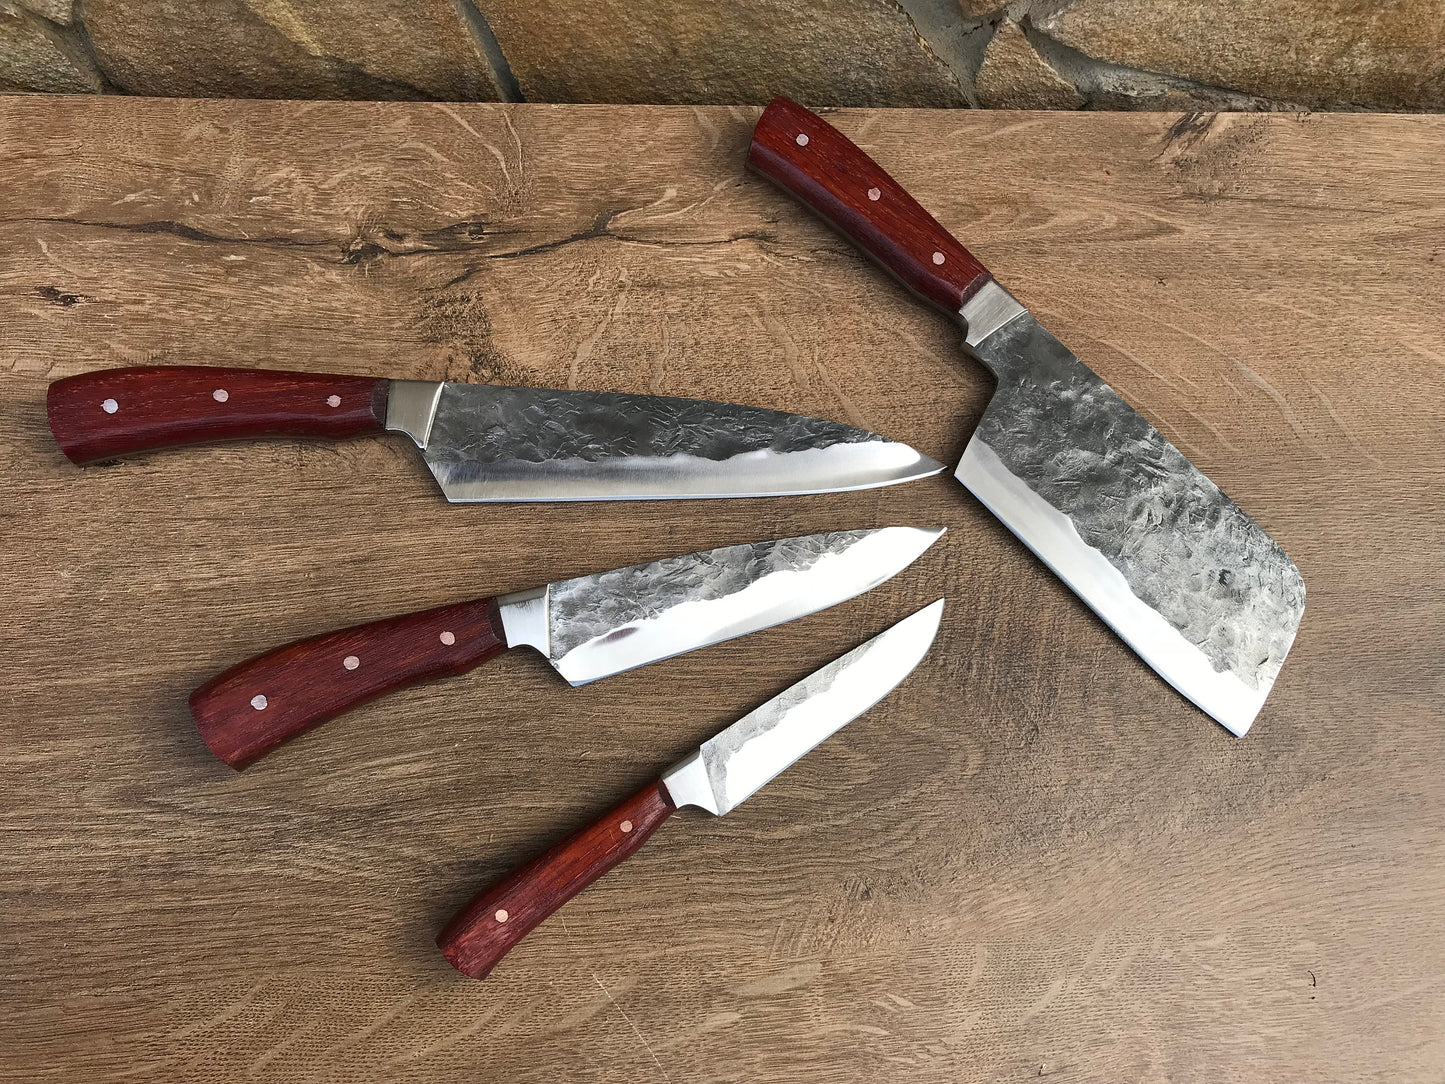 Knife set, kitchen knife, knife gift, culinary knife, knife, hand crafted knife, stainless steel knife, knife gift, steel gift, kitchen gift